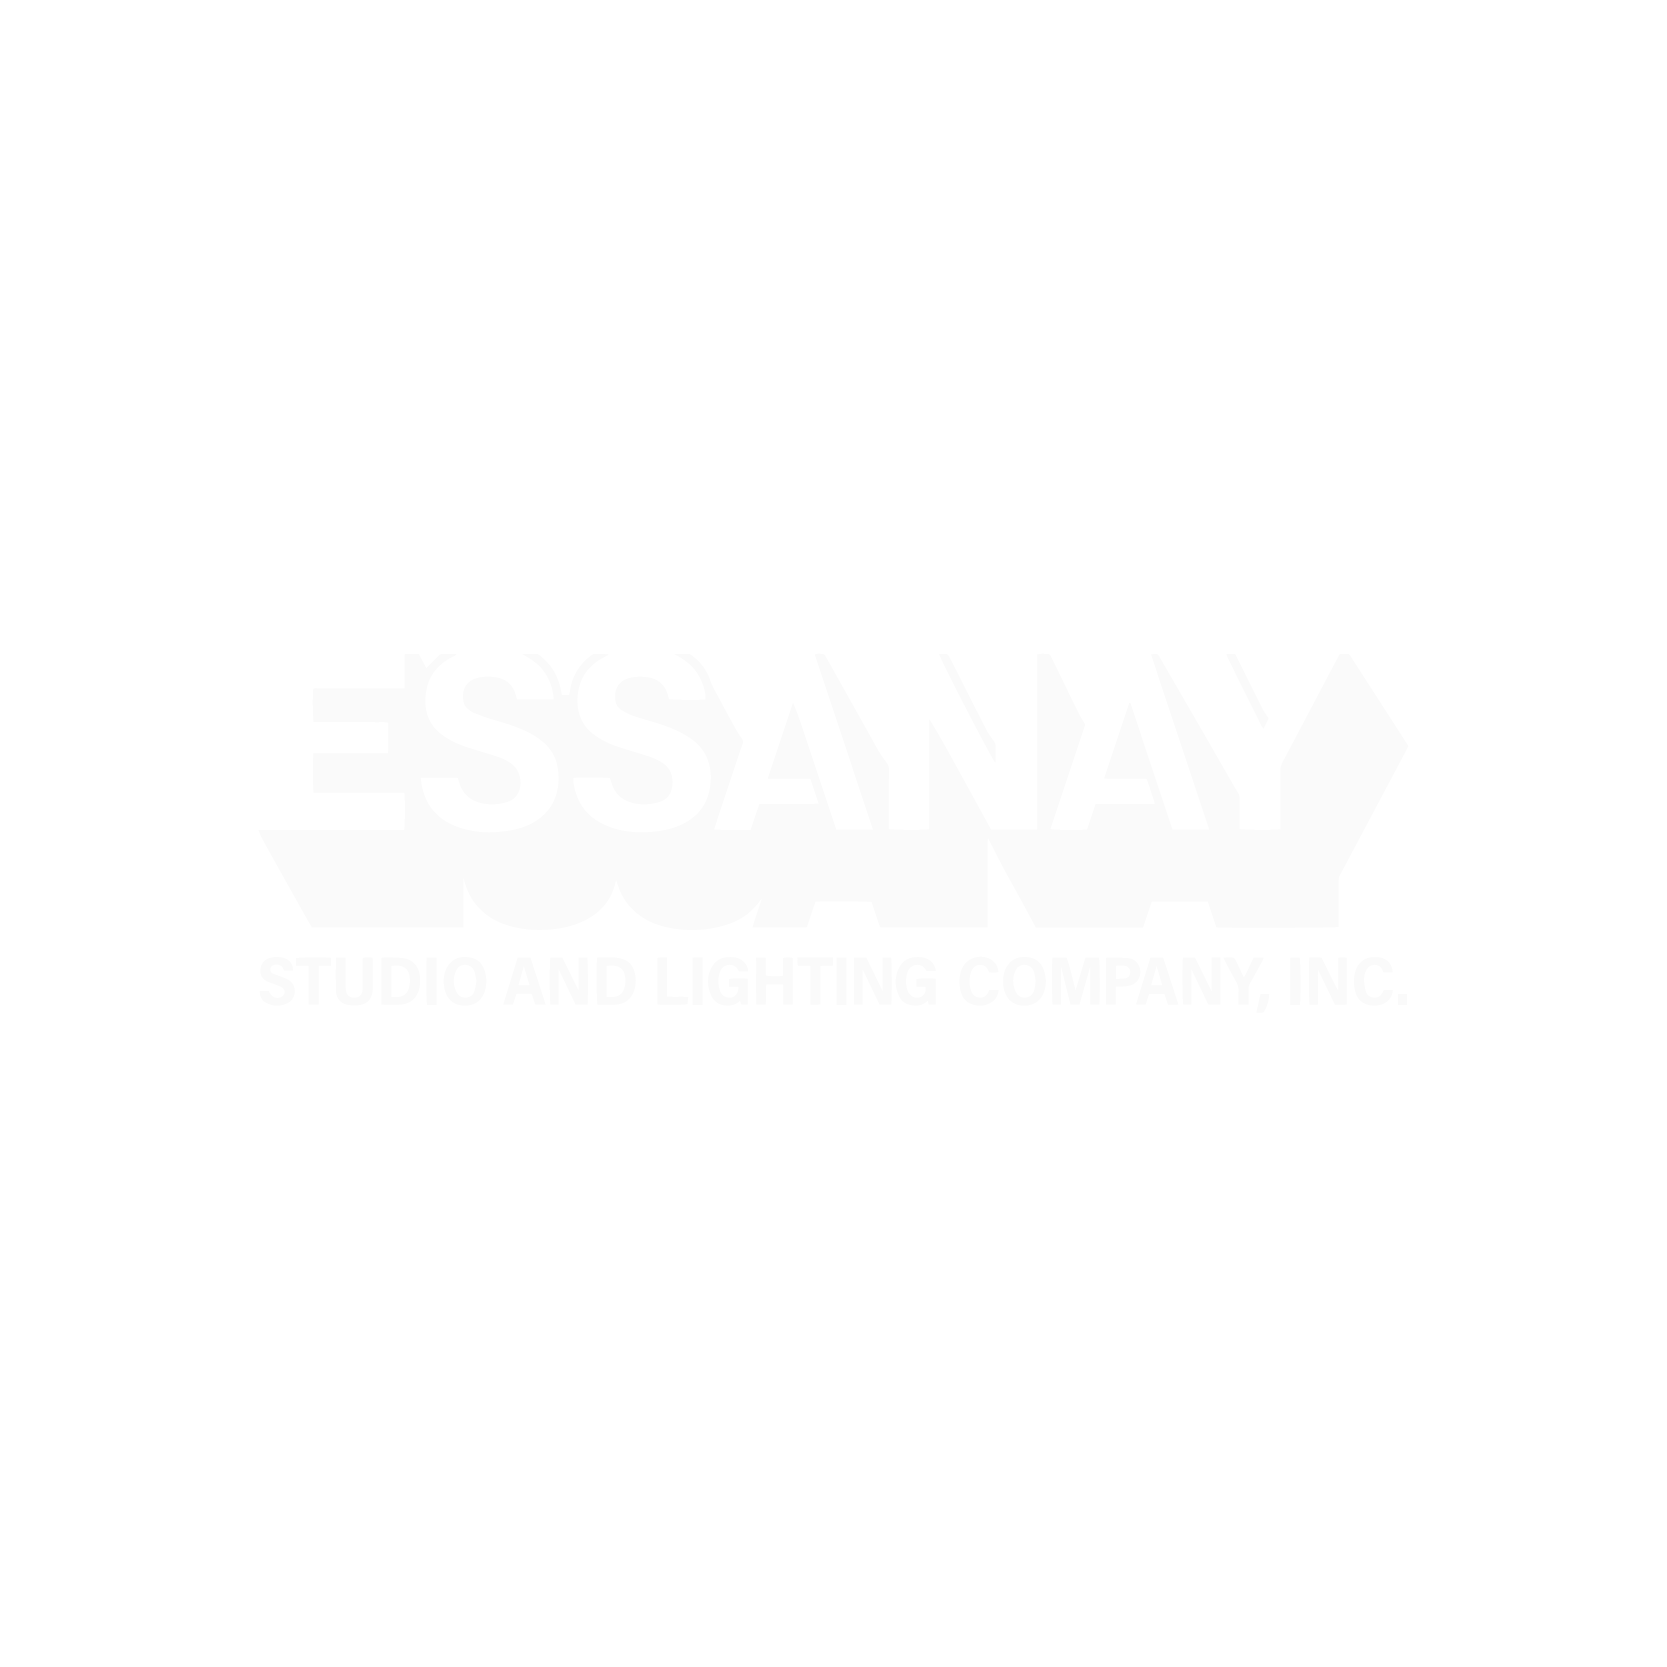 -_Essanay.png